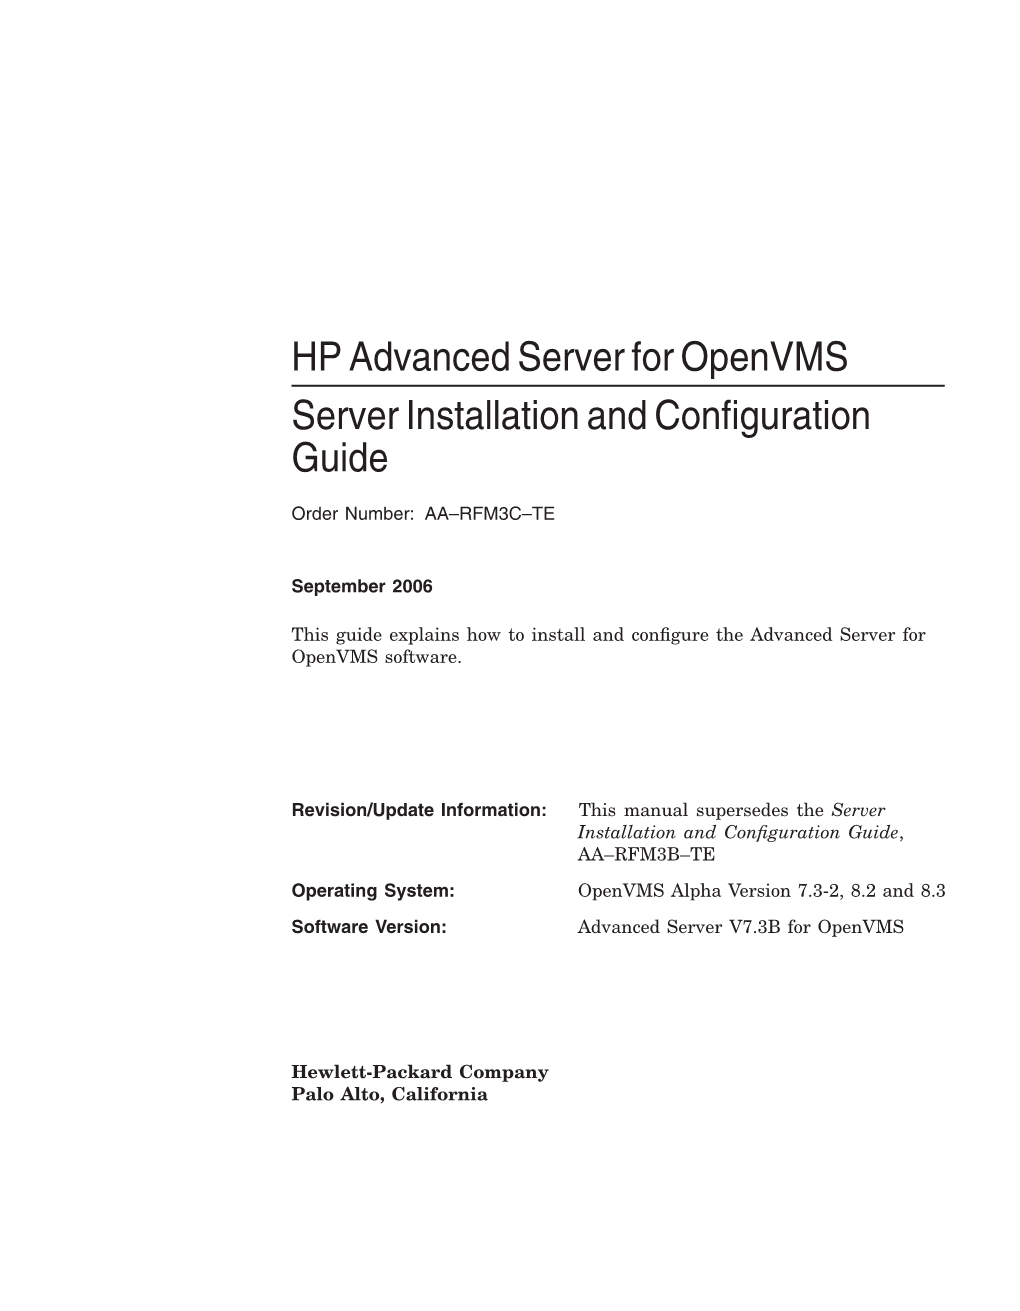 HP Advanced Server for Openvms Server Installation and Conﬁguration Guide